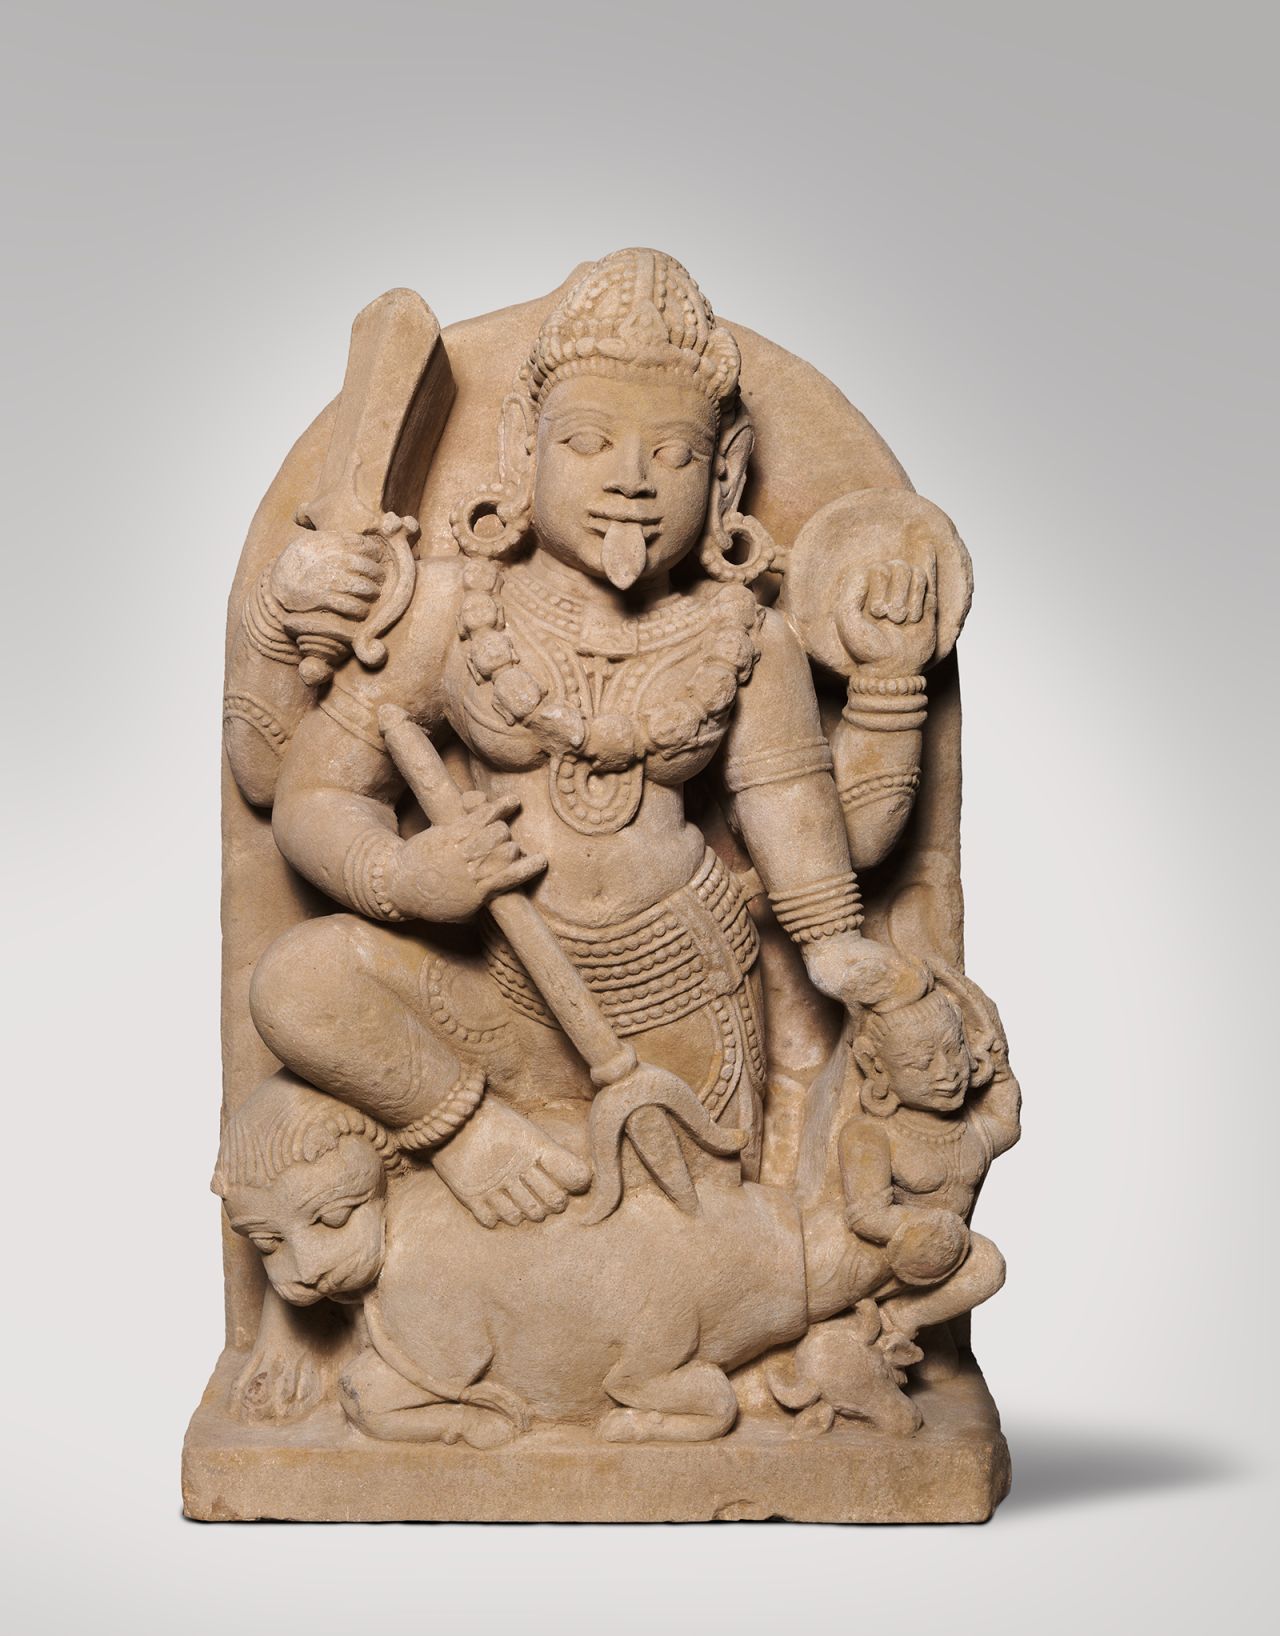 Believed to date back to the 12th to 13th centuries, this statue of the Goddess Durga slaying a buffalo demon was purchased by the National Gallery of Australia in 2002.